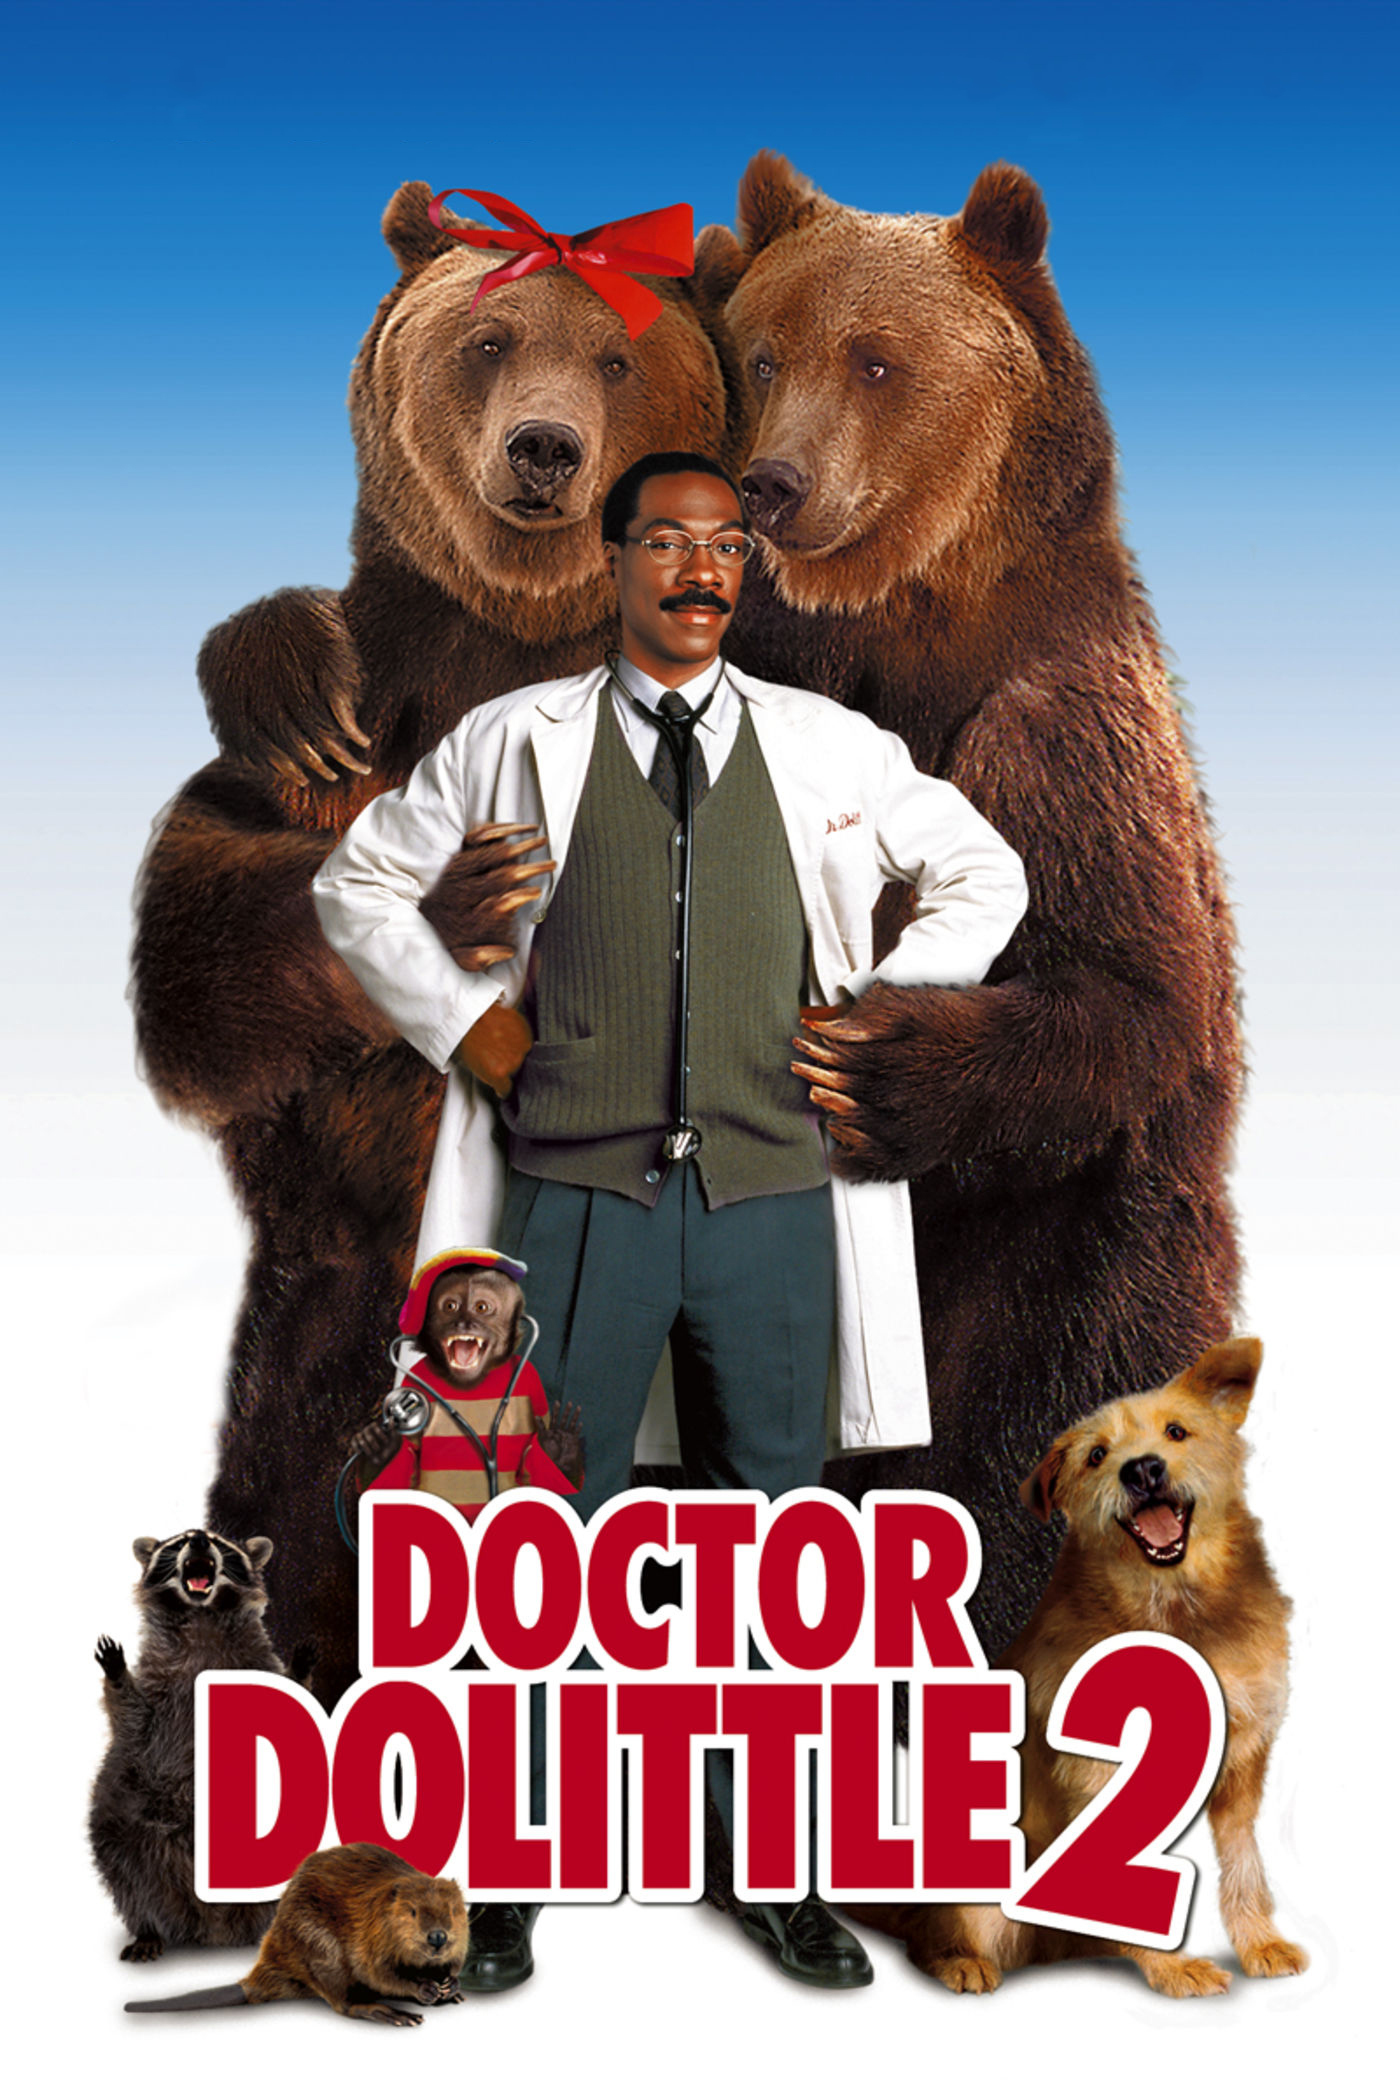 Amazing Dr. Dolittle 2 Pictures & Backgrounds